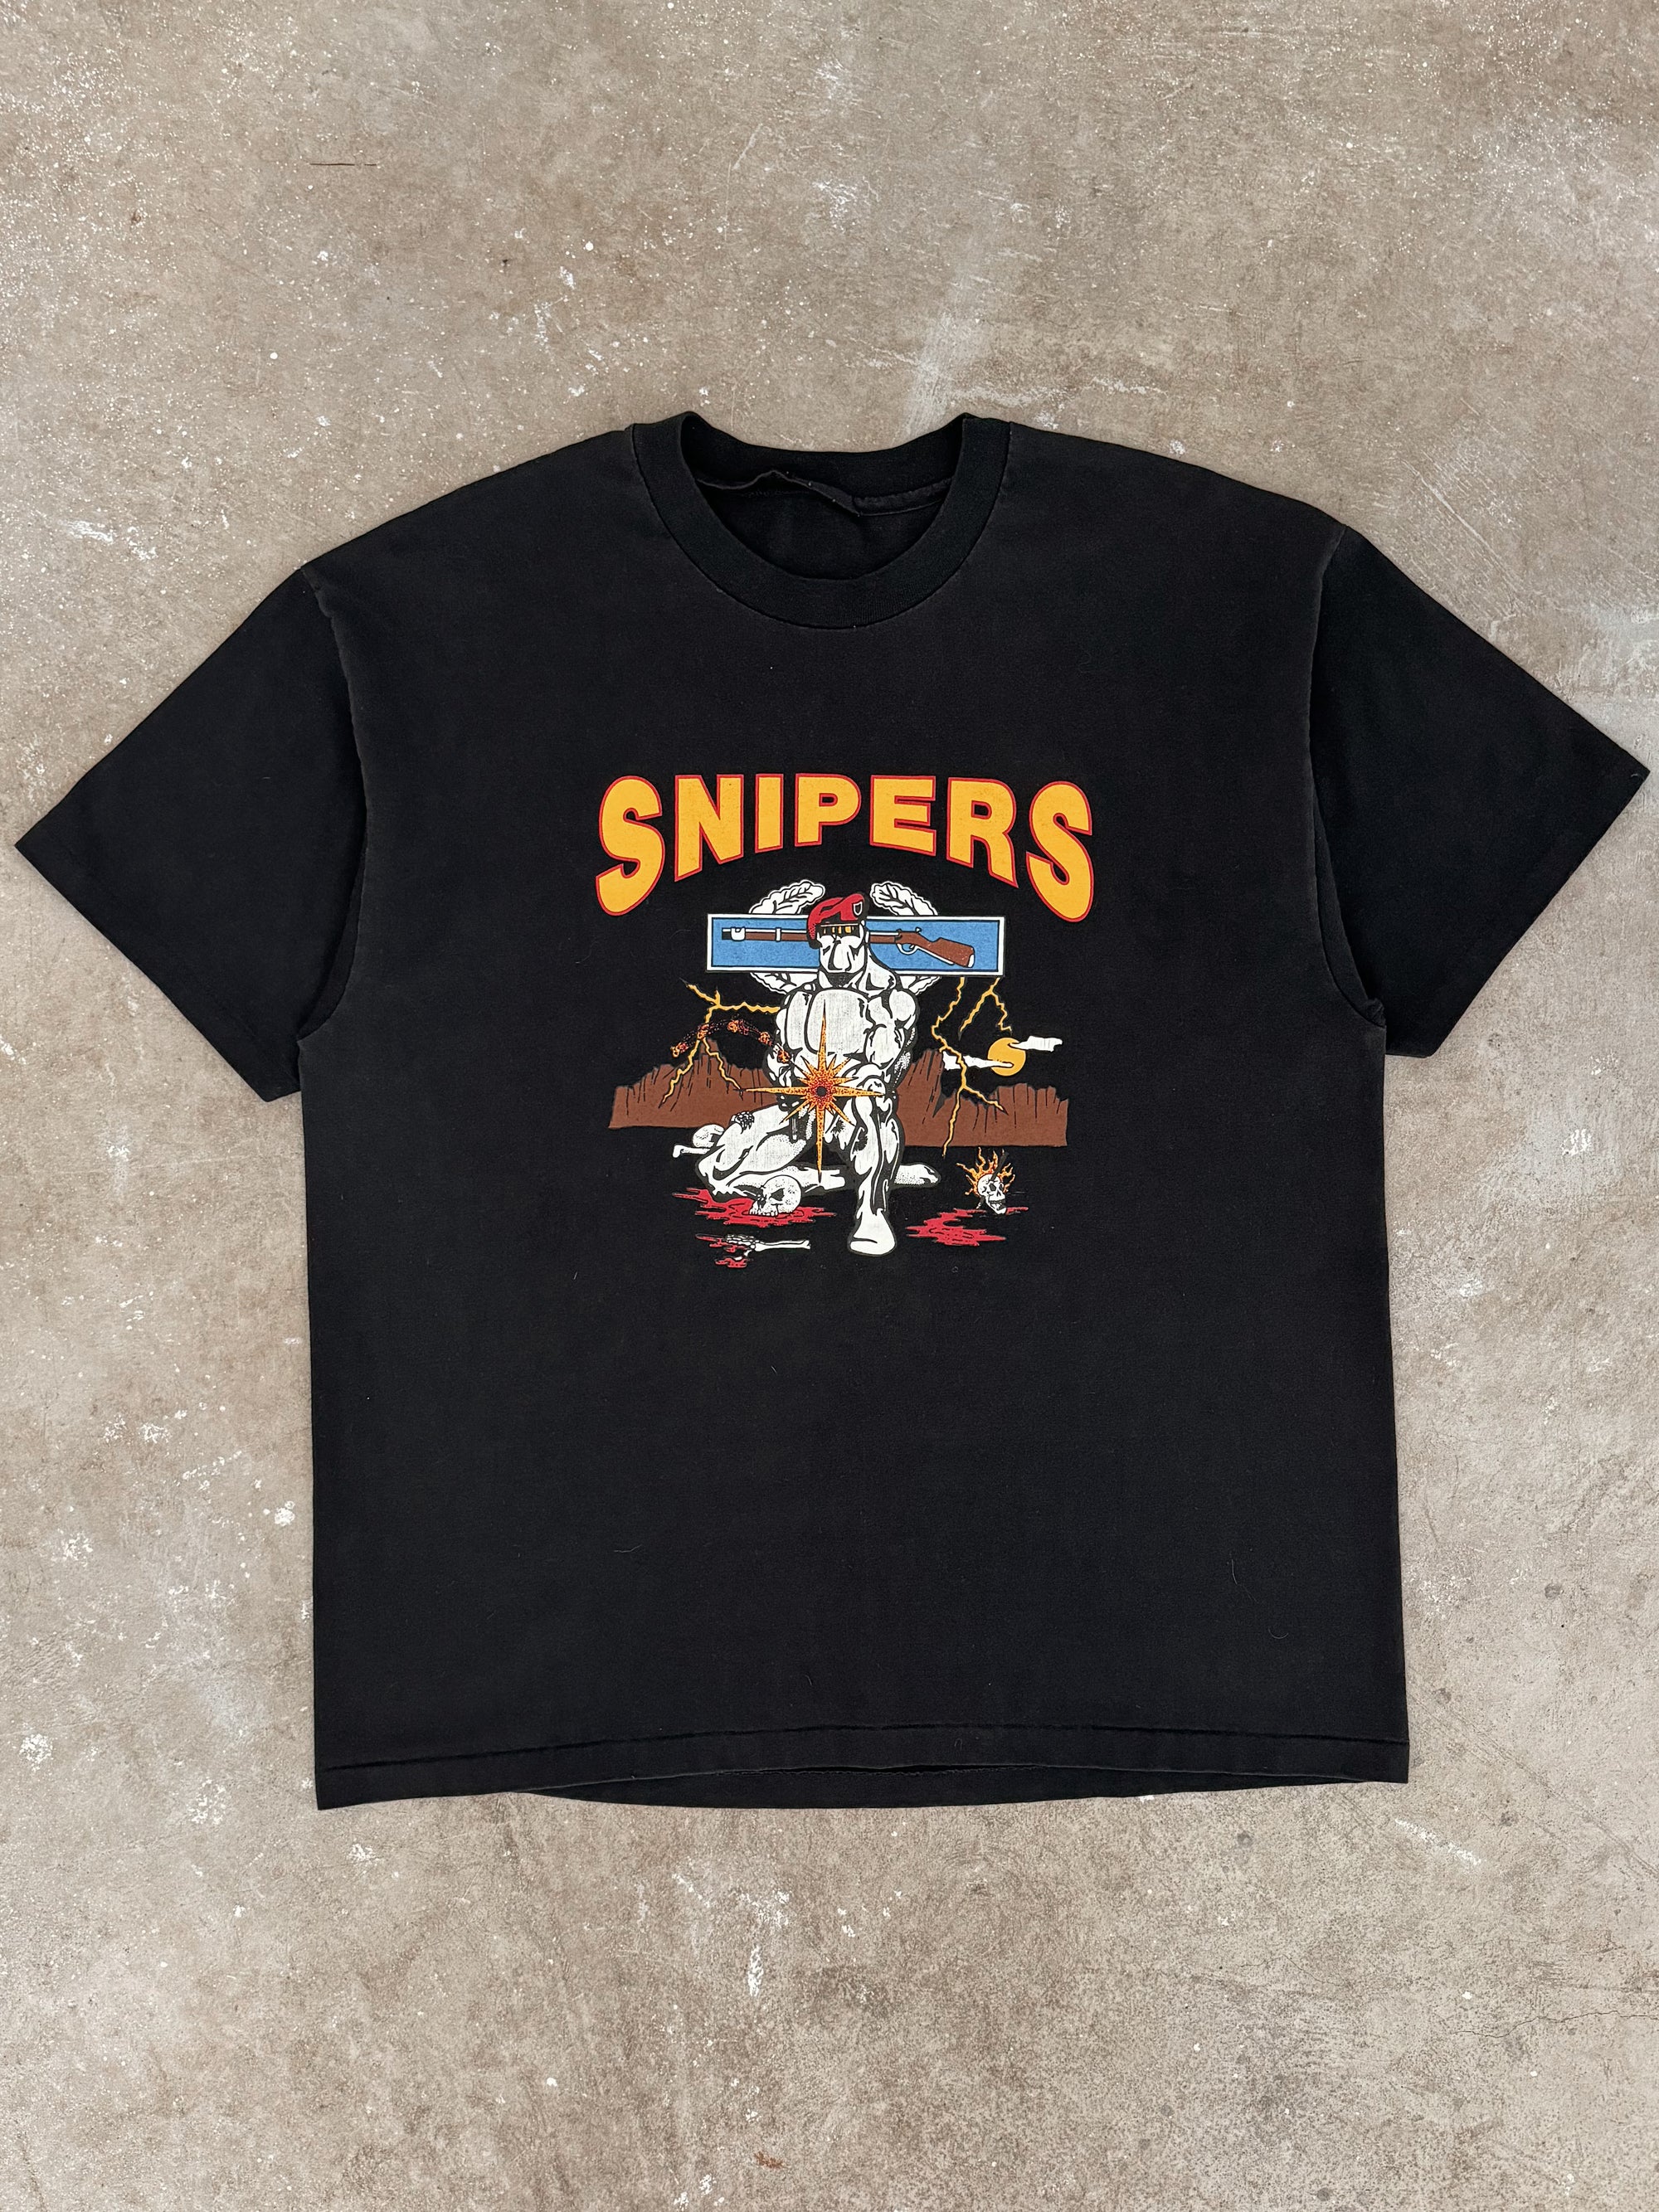 1990s "Snipers" Tee (L/XL)